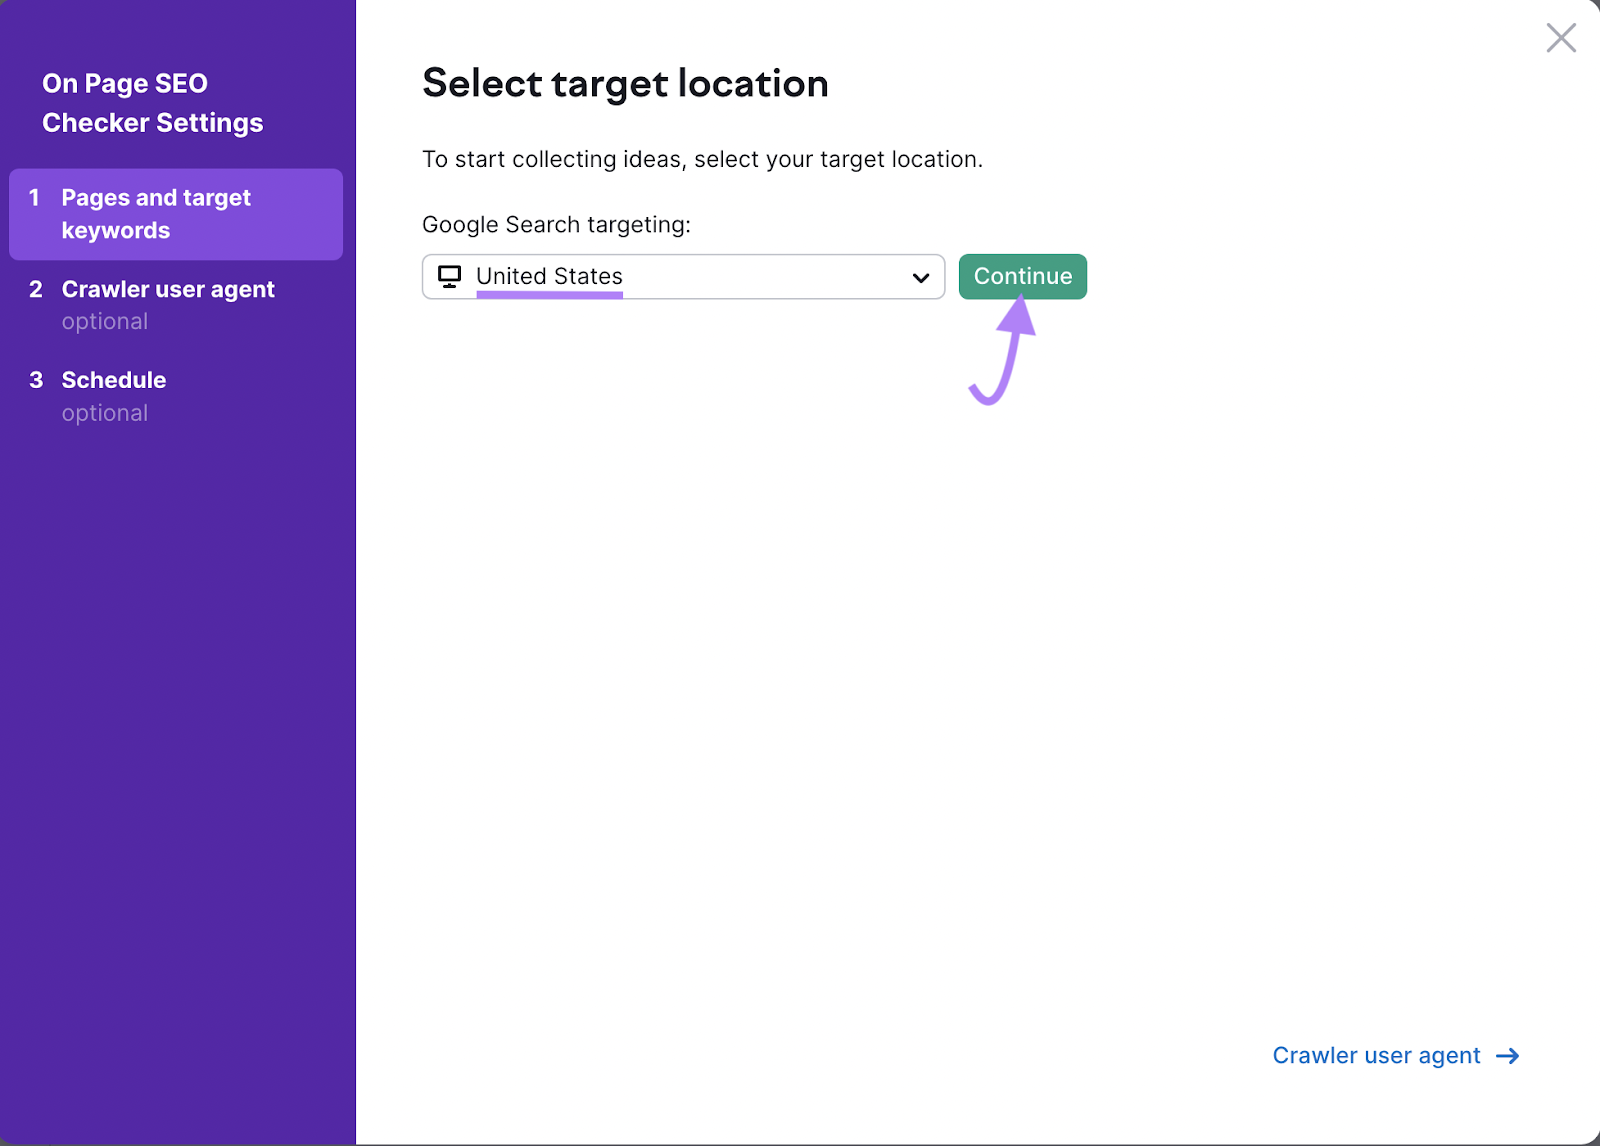 "Select target location" popup window in On Page SEO Checker